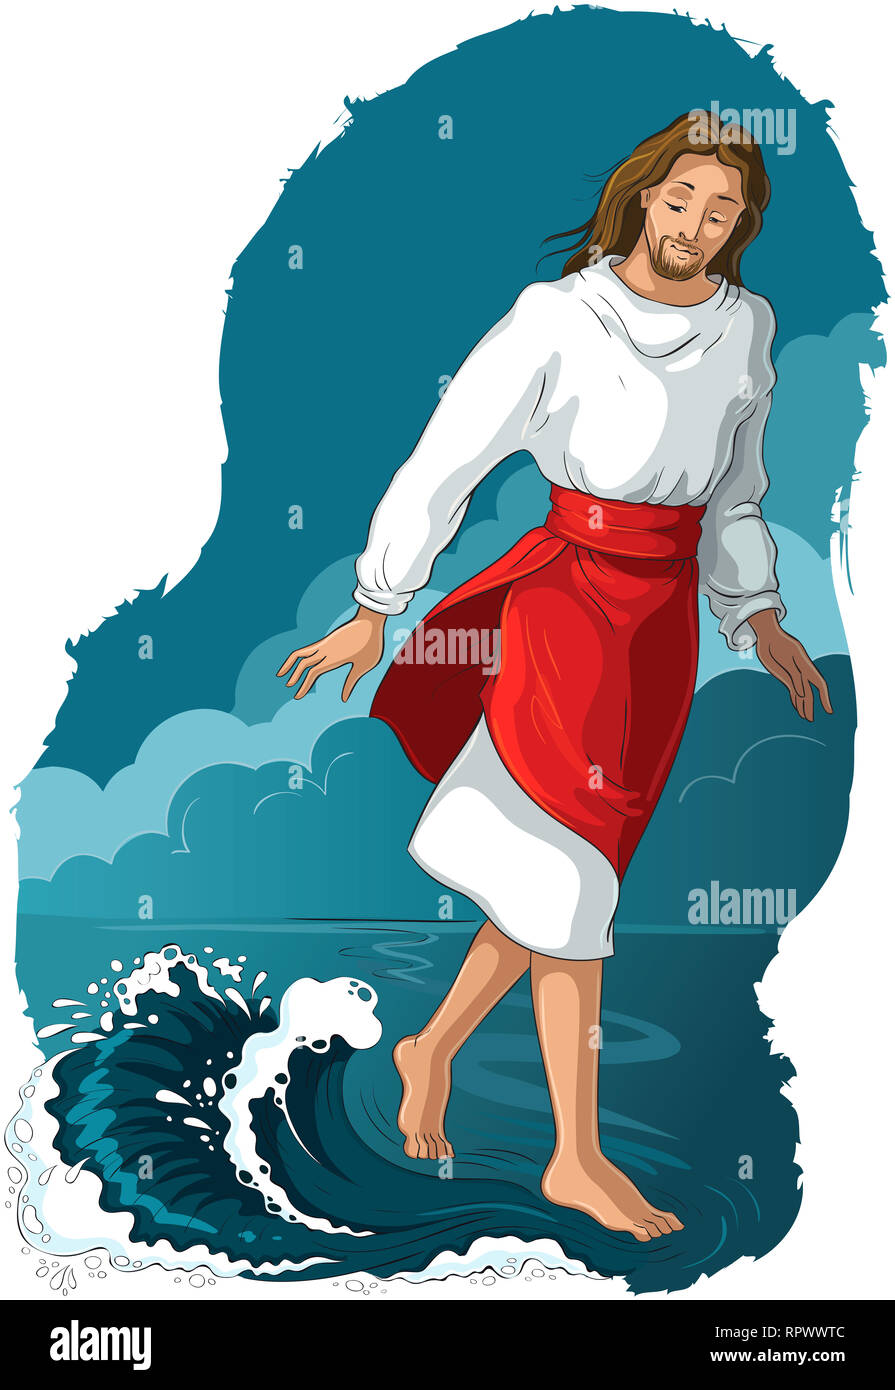 Bible story. Jesus walking on water. Cartoon christian colored illustration of Events in Jesus' Life Stock Photo